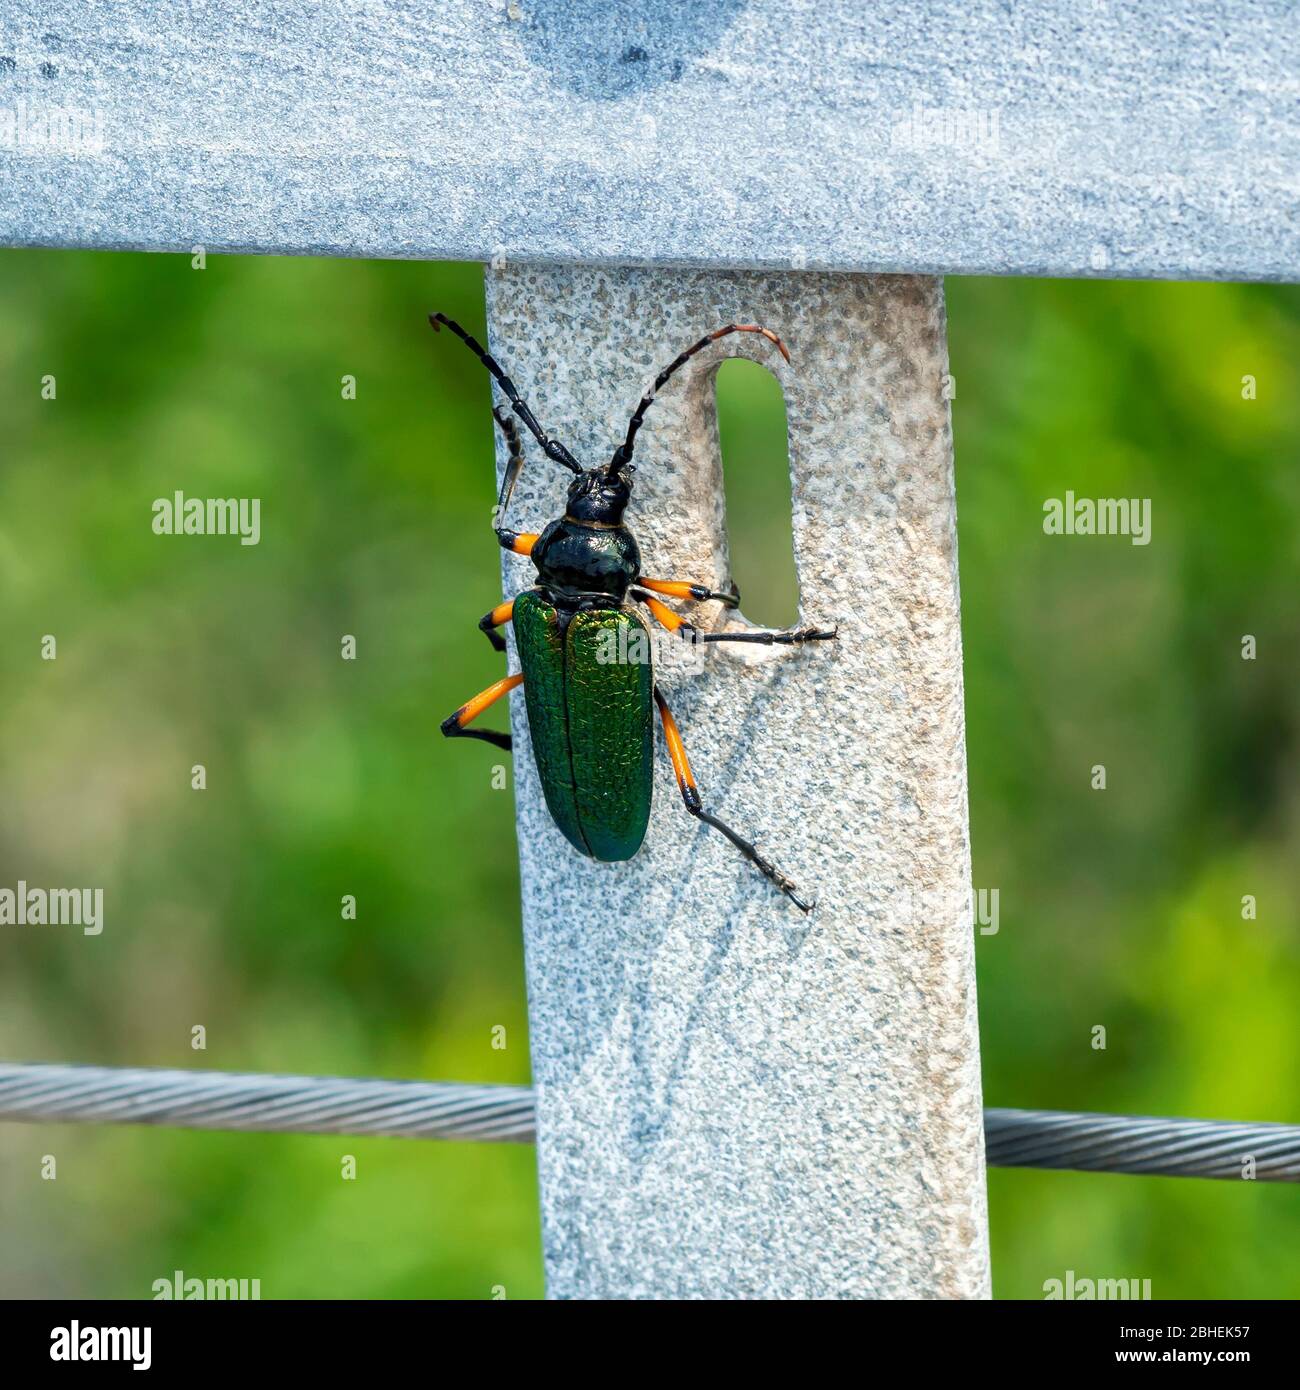 A Callona rimosa, or Beautiful Mesquite Borer beetle. Photo taken at the Oso Bay Wetlands Preserve and Learning Center.in Corpus Christi, Texas USA. Stock Photo